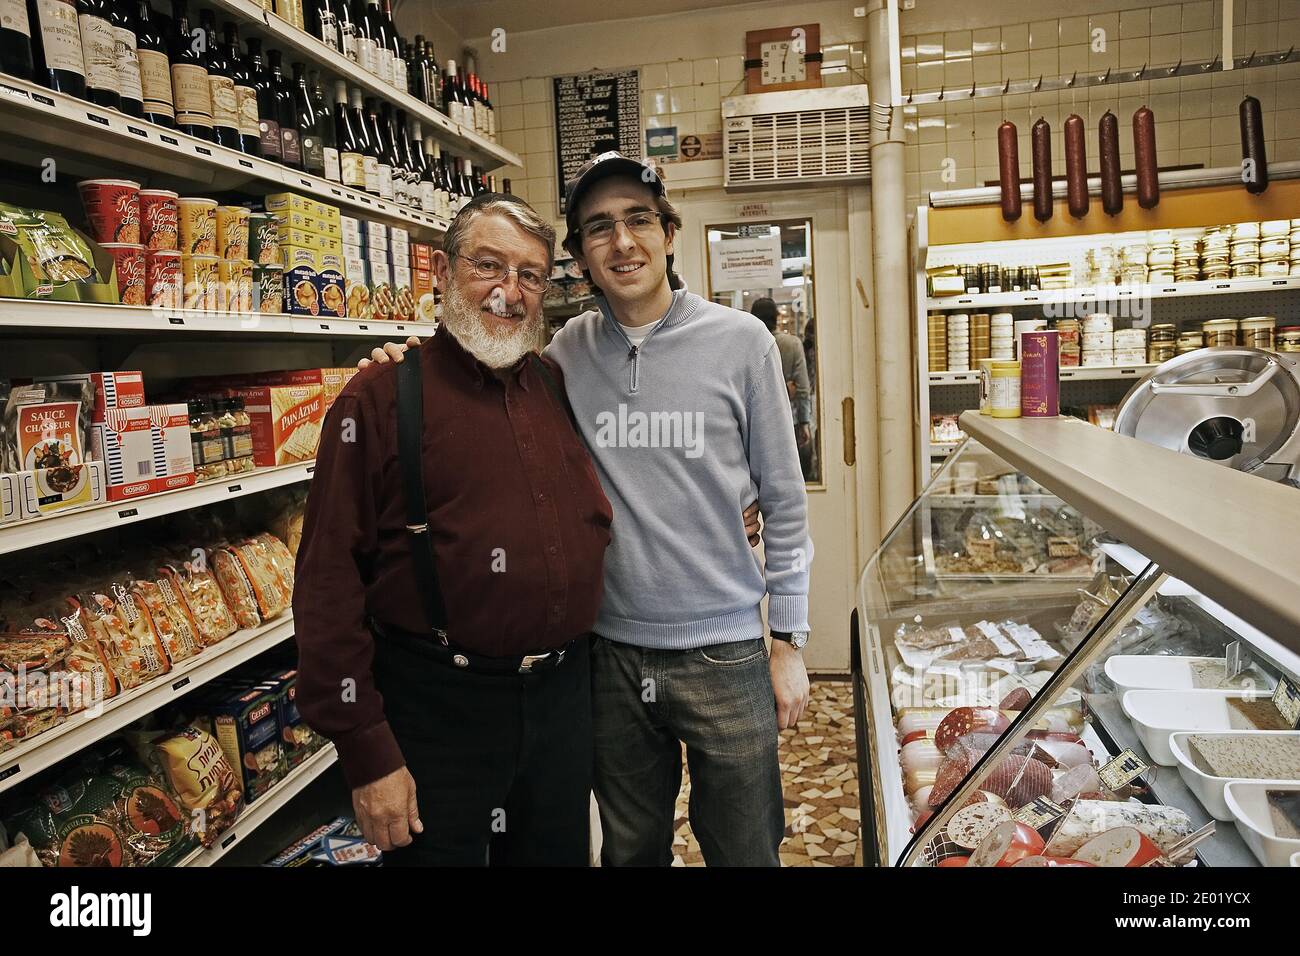 FRANCE / IIe-de-France/Paris/ Le Marais/  Jewish Family run business ,Father and his Son posing in Small local Charcutier in Paris Stock Photo